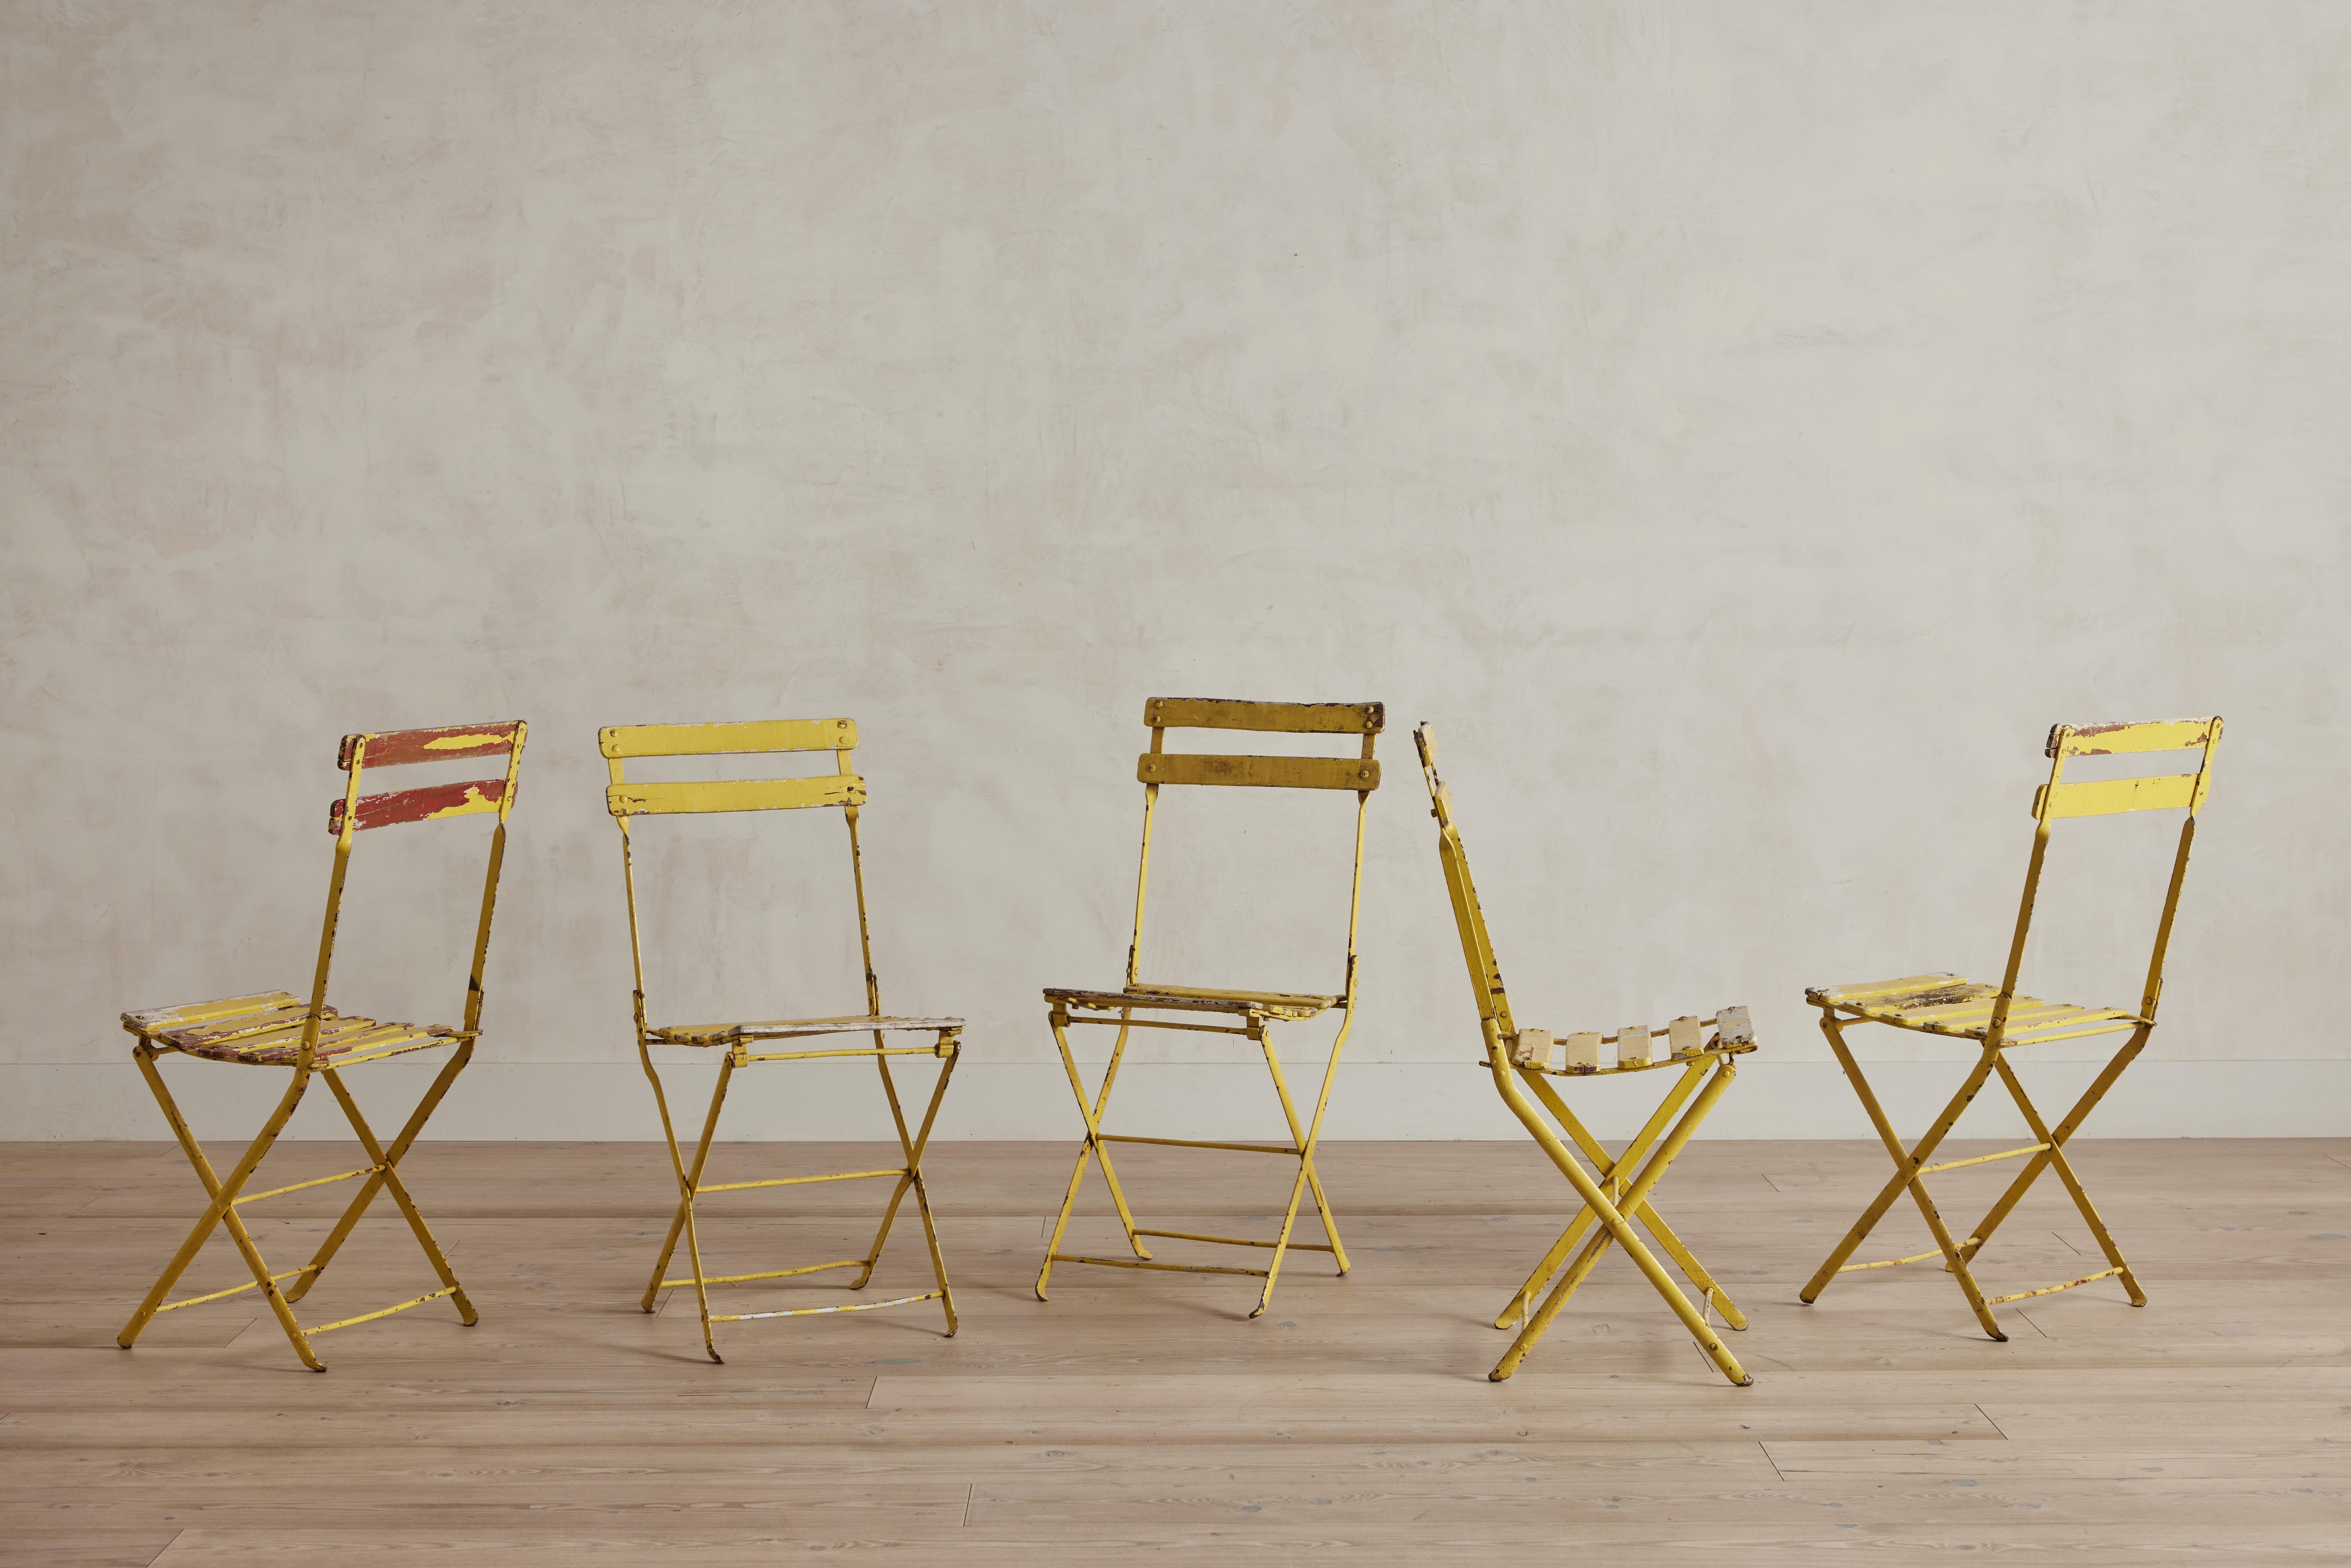 Set of five yellow painted garden chairs from France circa 1950. Made of wood and metal. Wear throughout is consistent with age and use. 